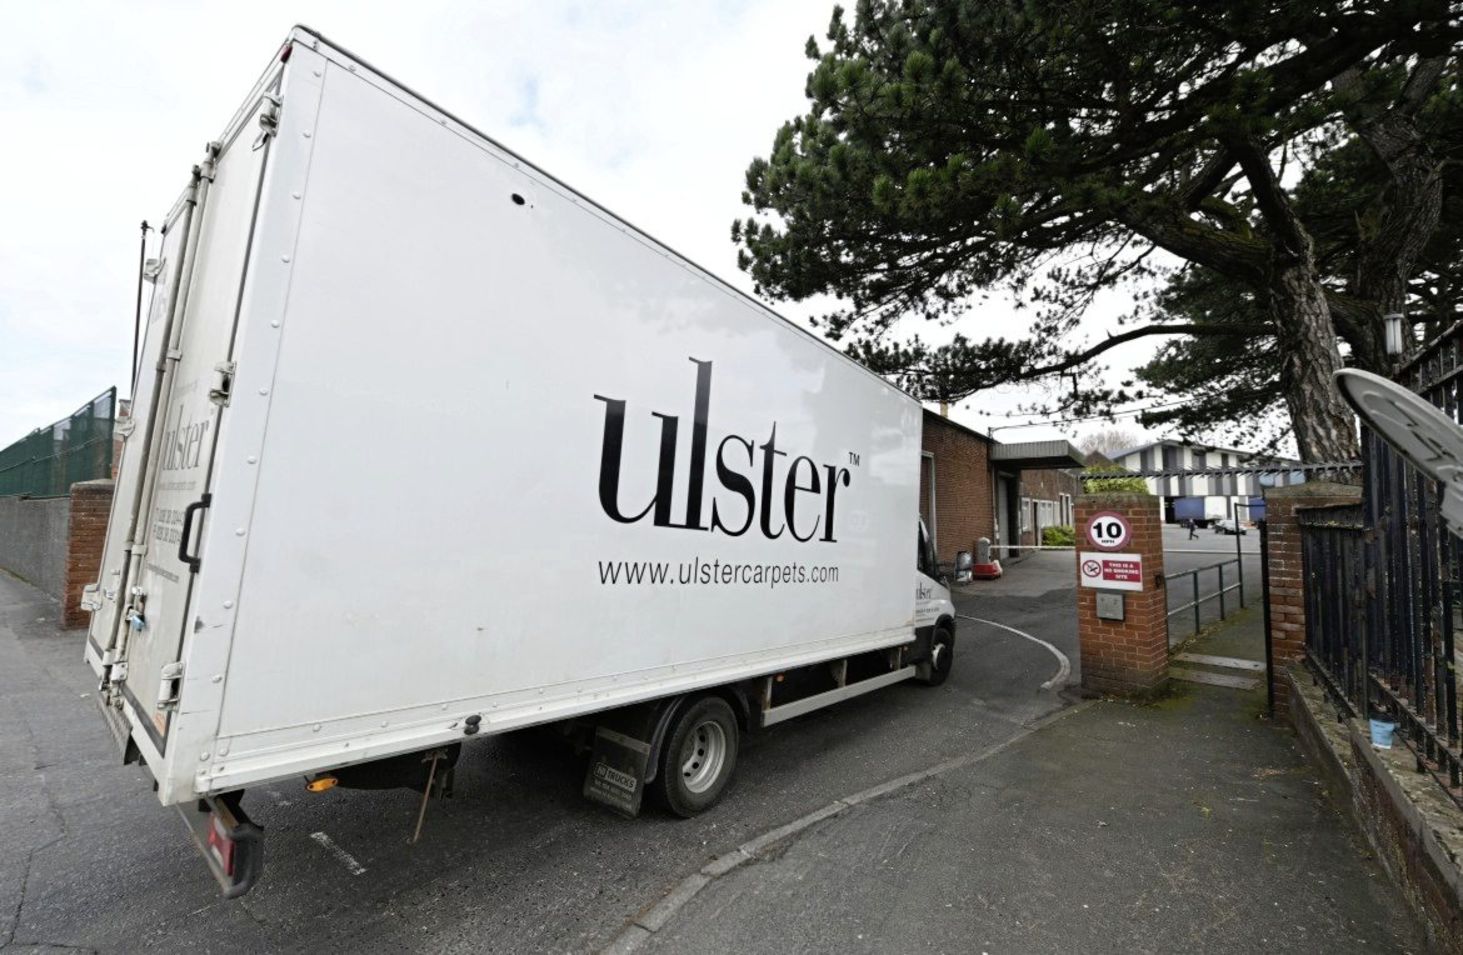 Return To Profit At Ulster Carpets As It Invests In Weaving Technology The Irish News